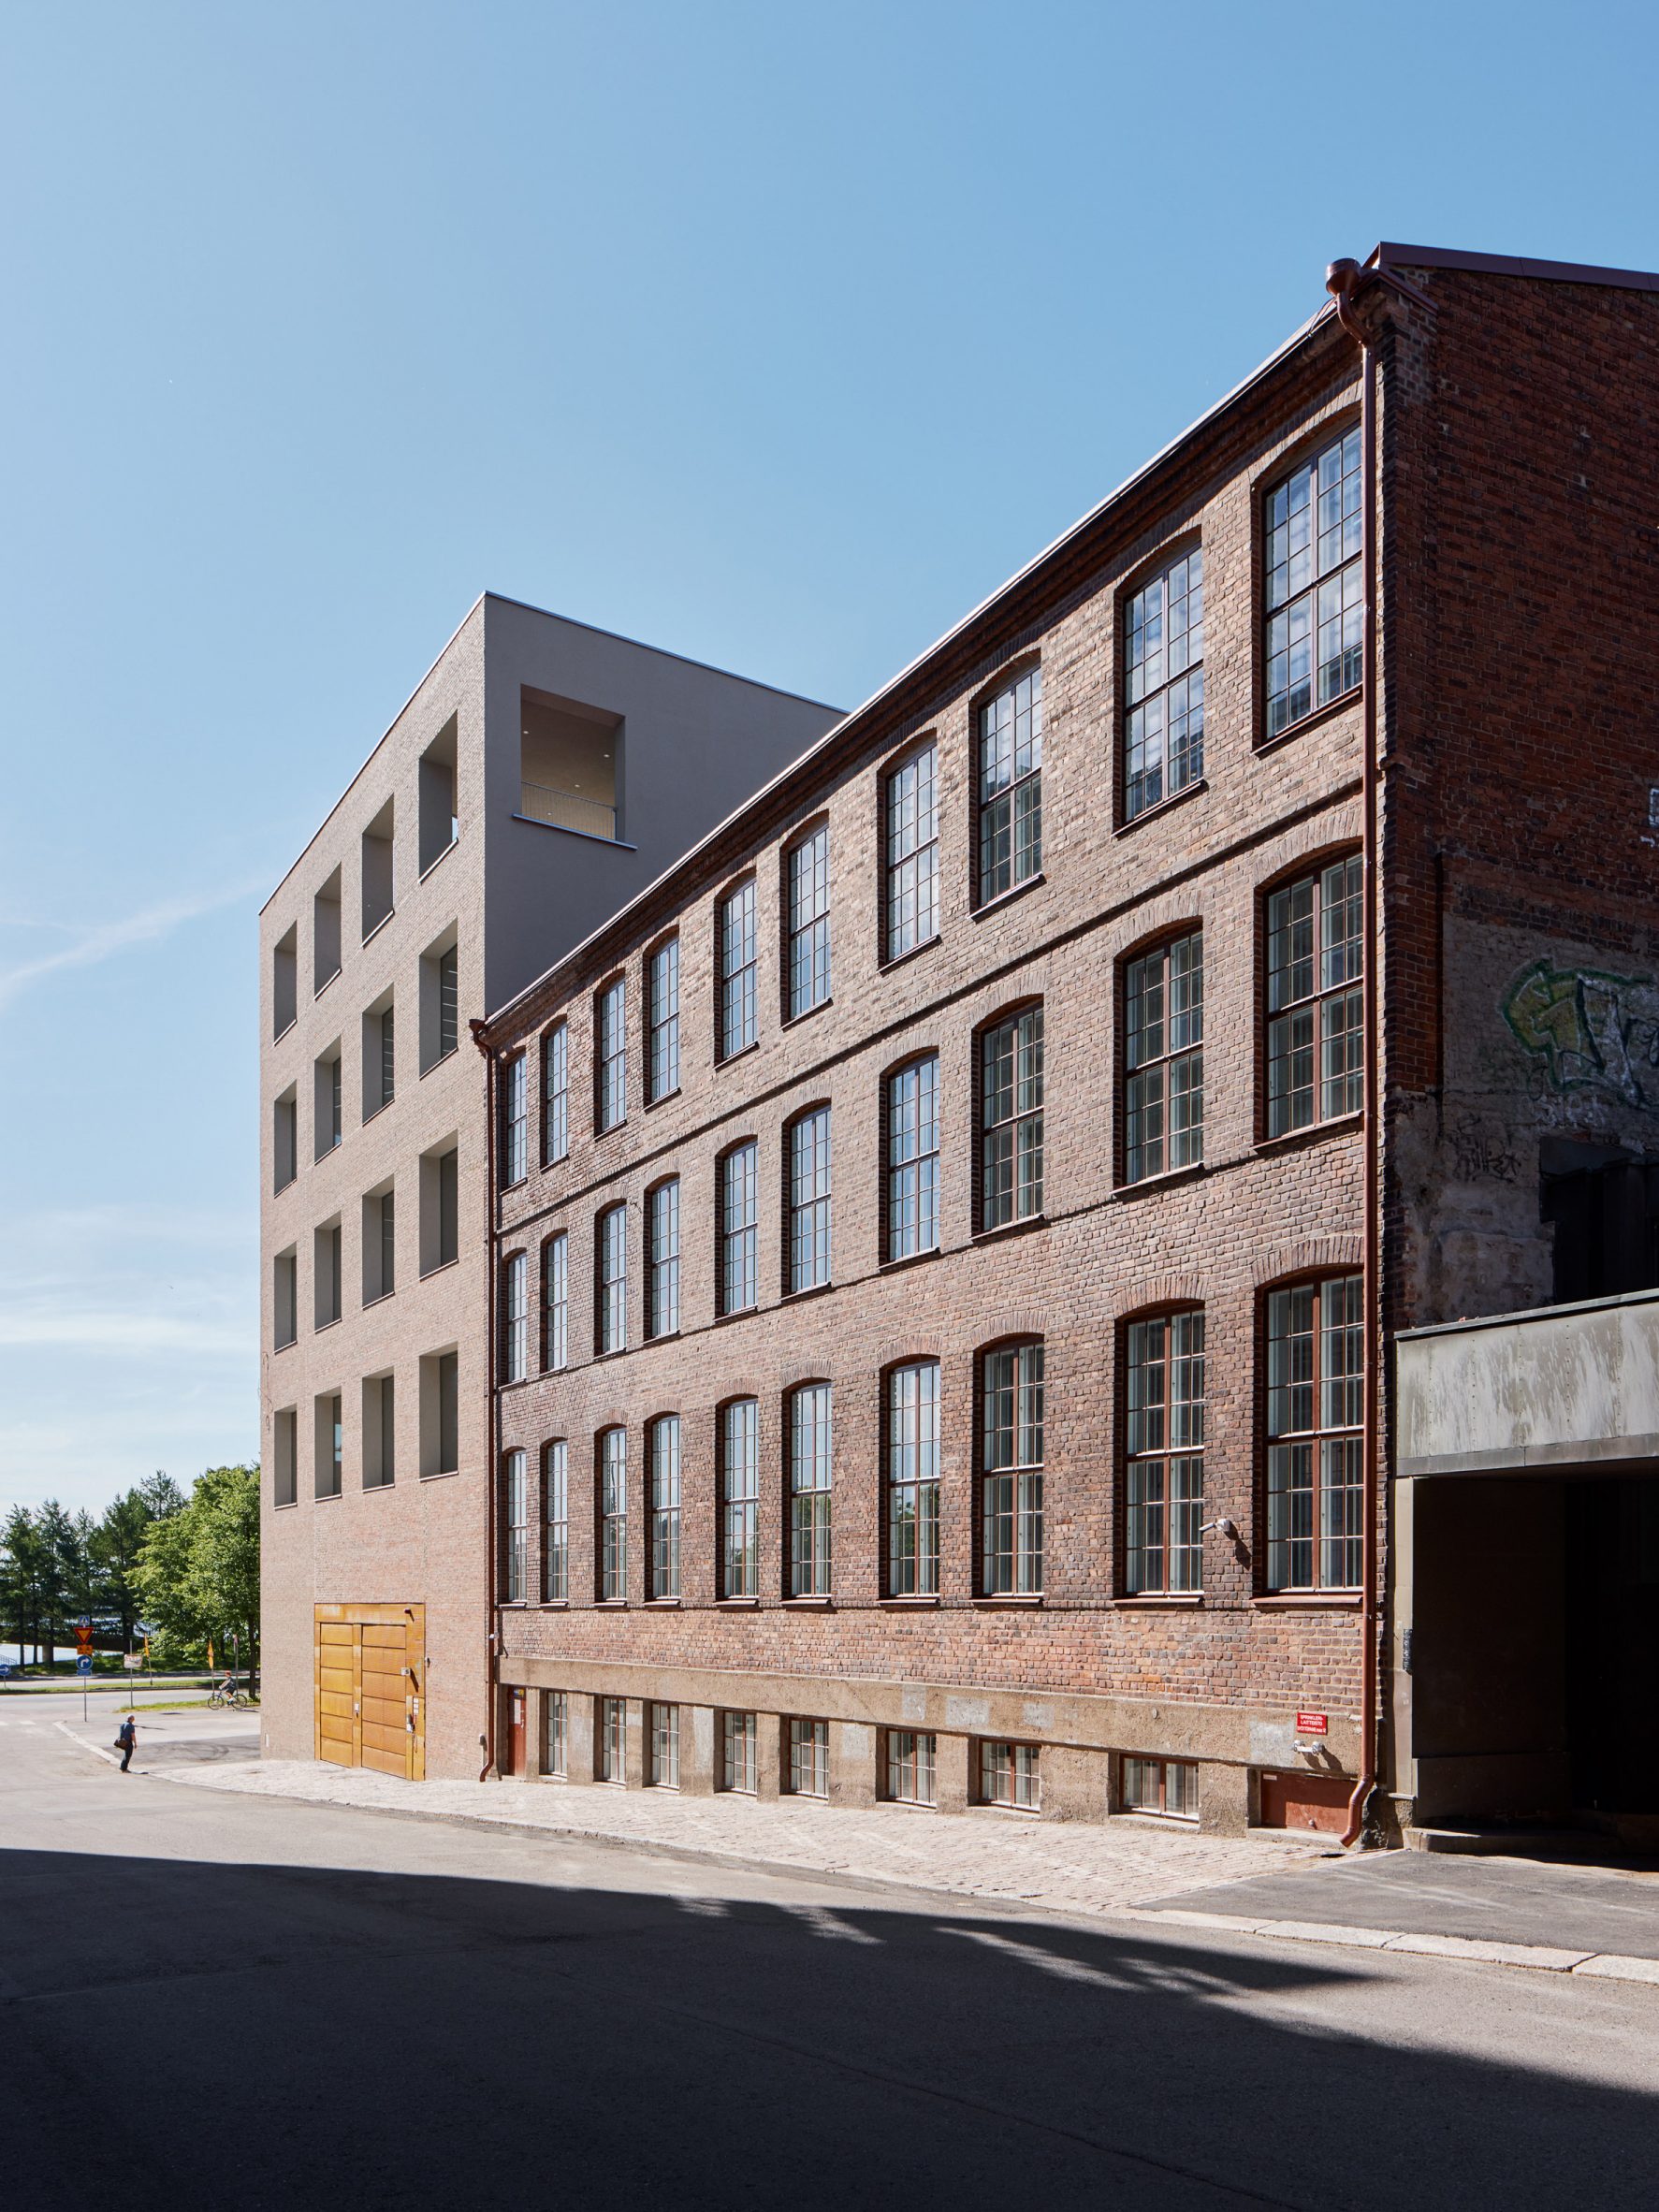 Exterior of the original warehouse building beside the new addition at the University of the Arts Helsinki